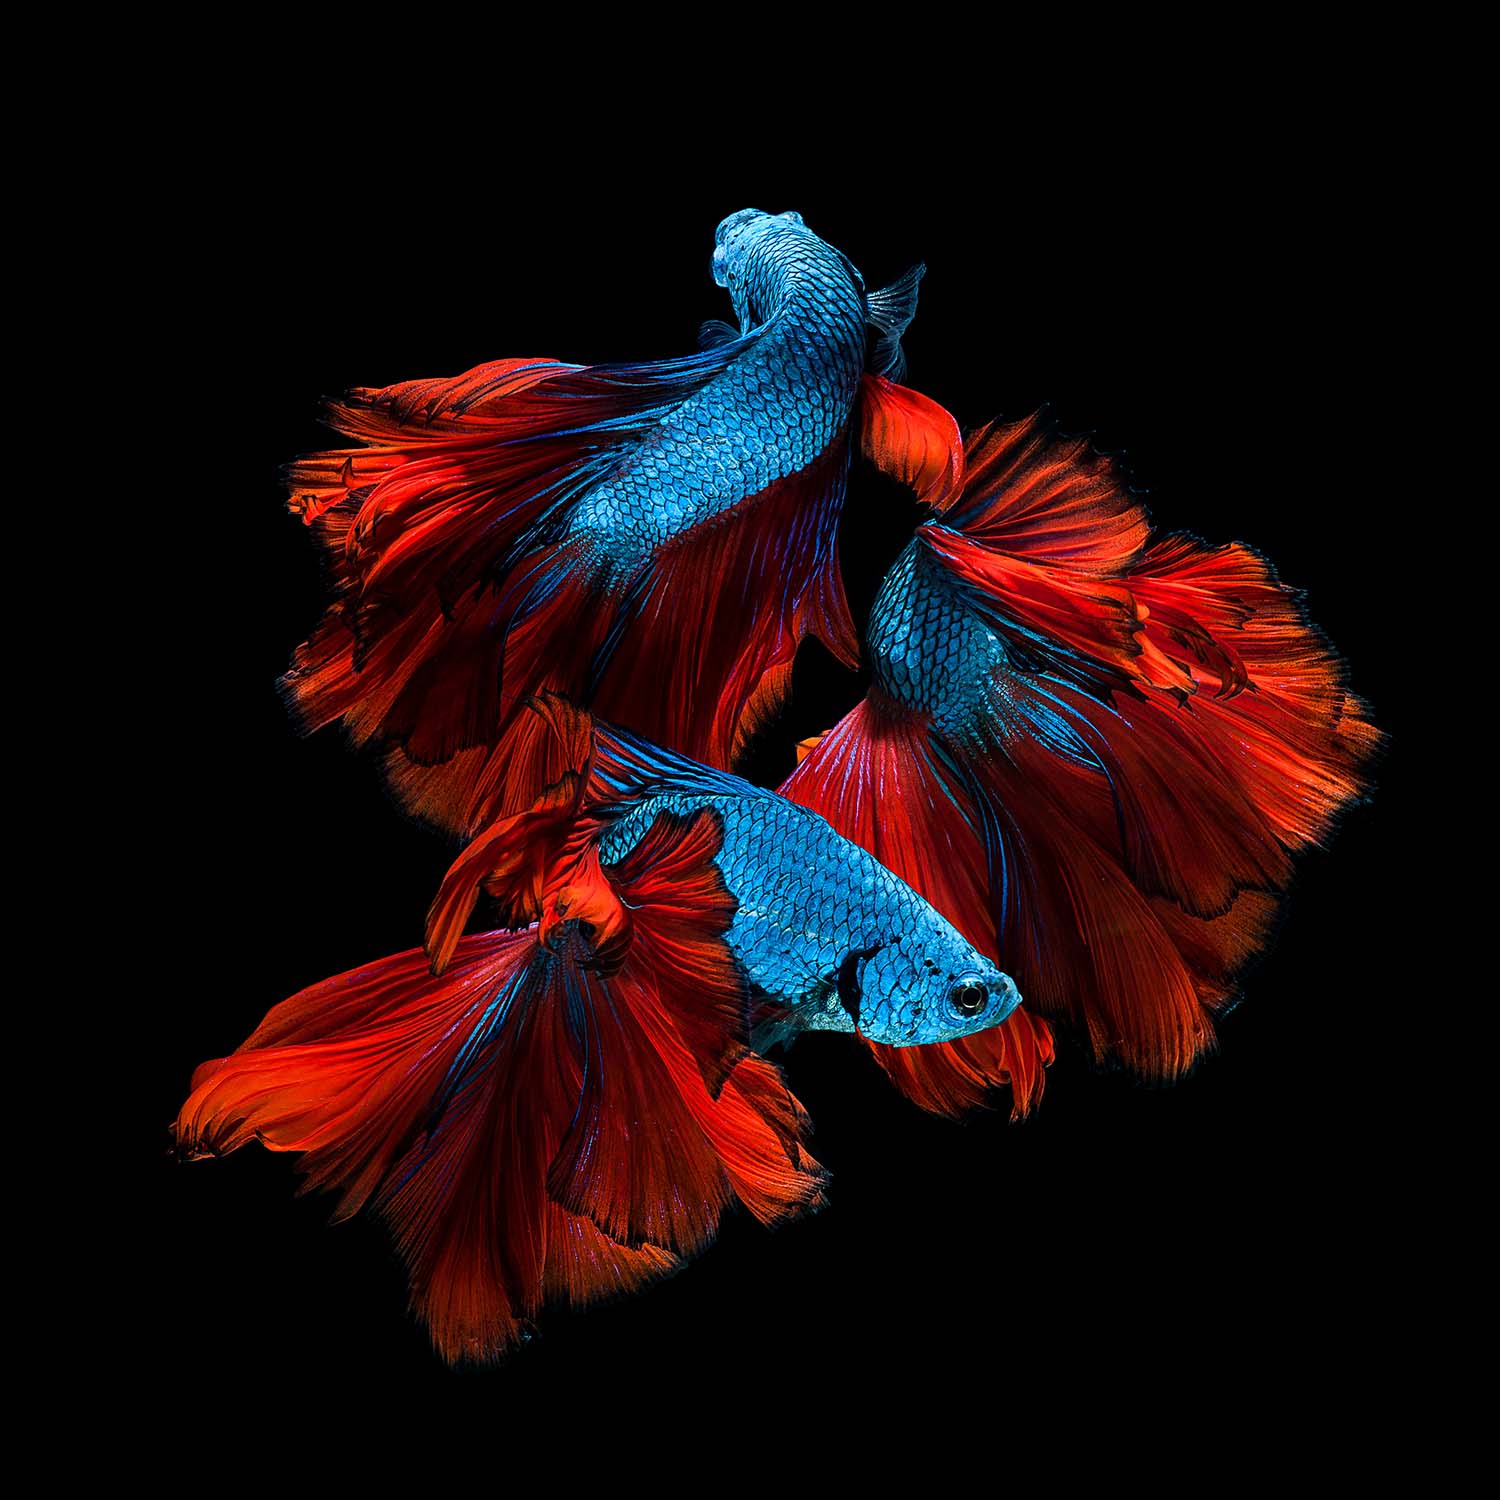 Top tips for photographing Mount Fuji and Siamese fighting fish